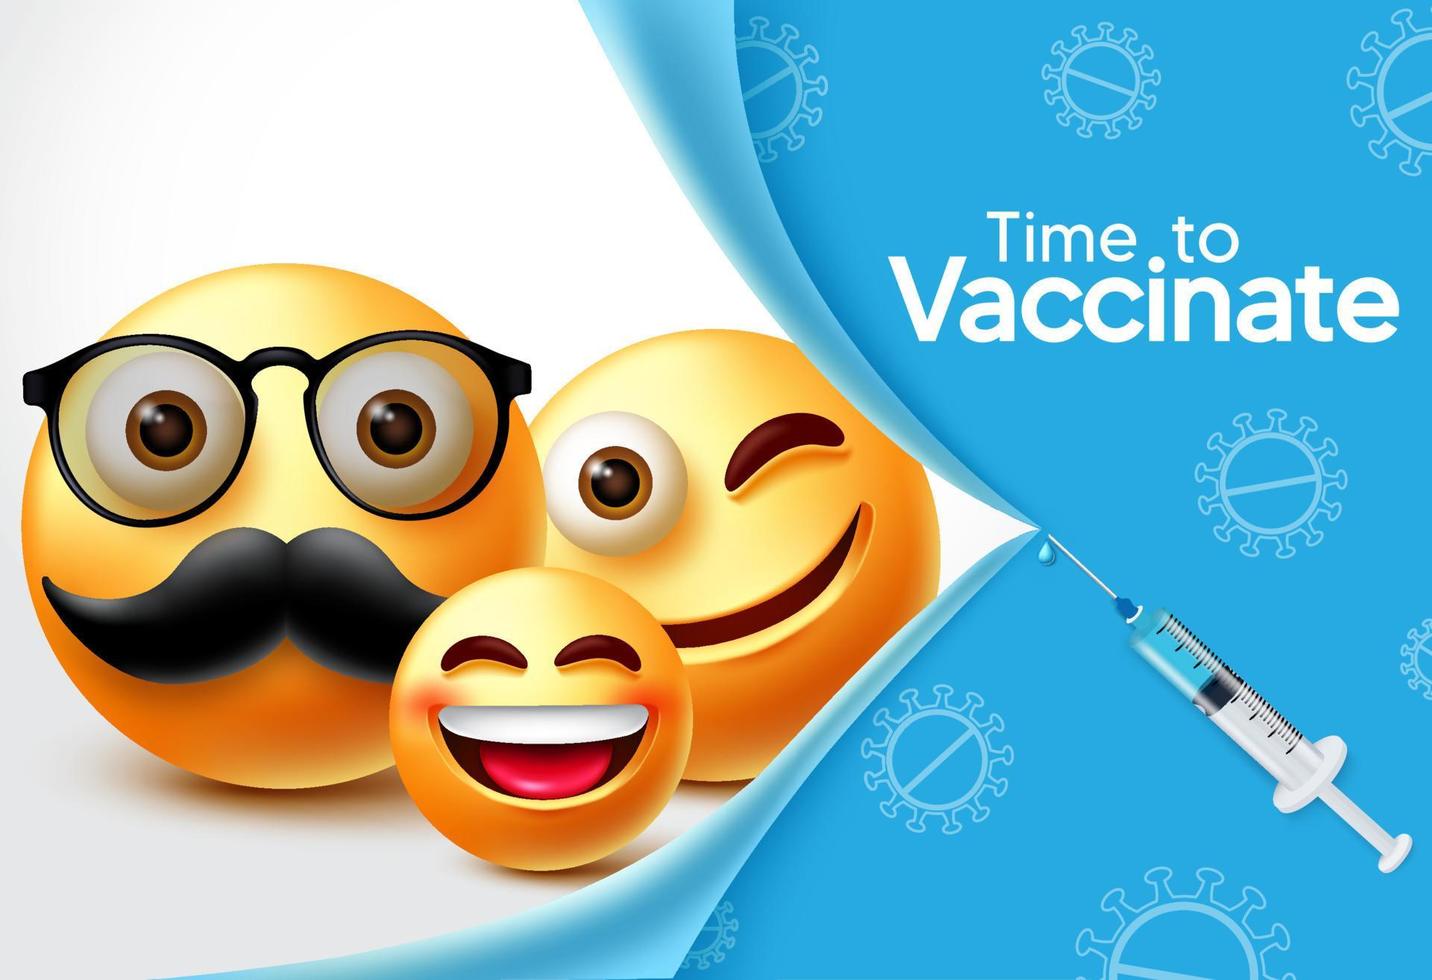 Emoji characters vaccine vector banner design. Time to vaccinate text with family 3d emojis character and syringe element for covid-19 vaccination and prevention design. Vector illustration